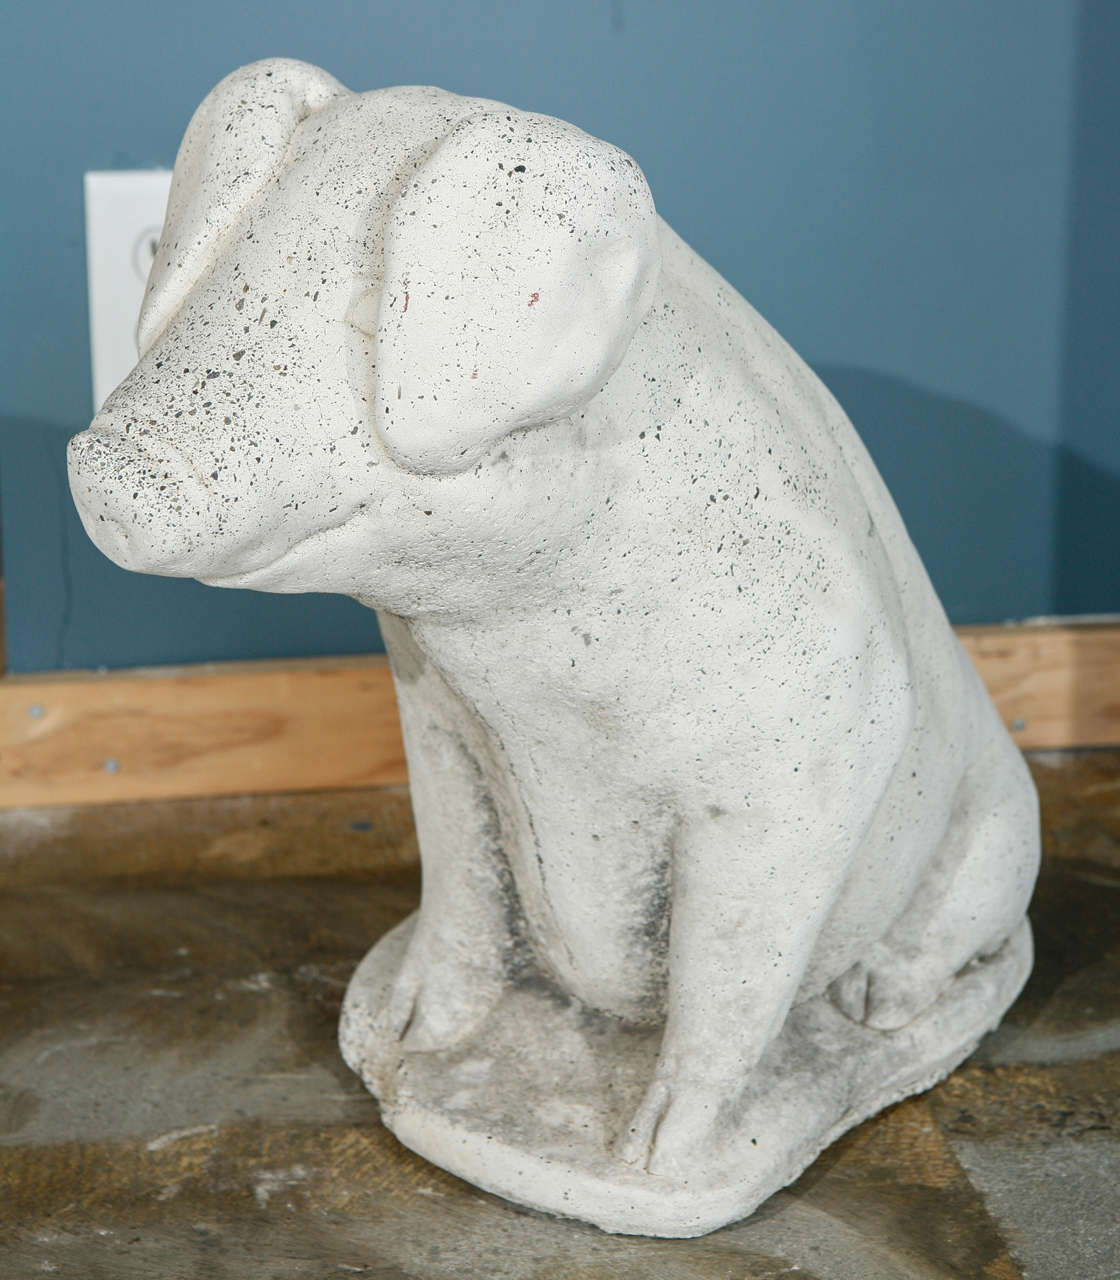 Charming stone pig for the garden.